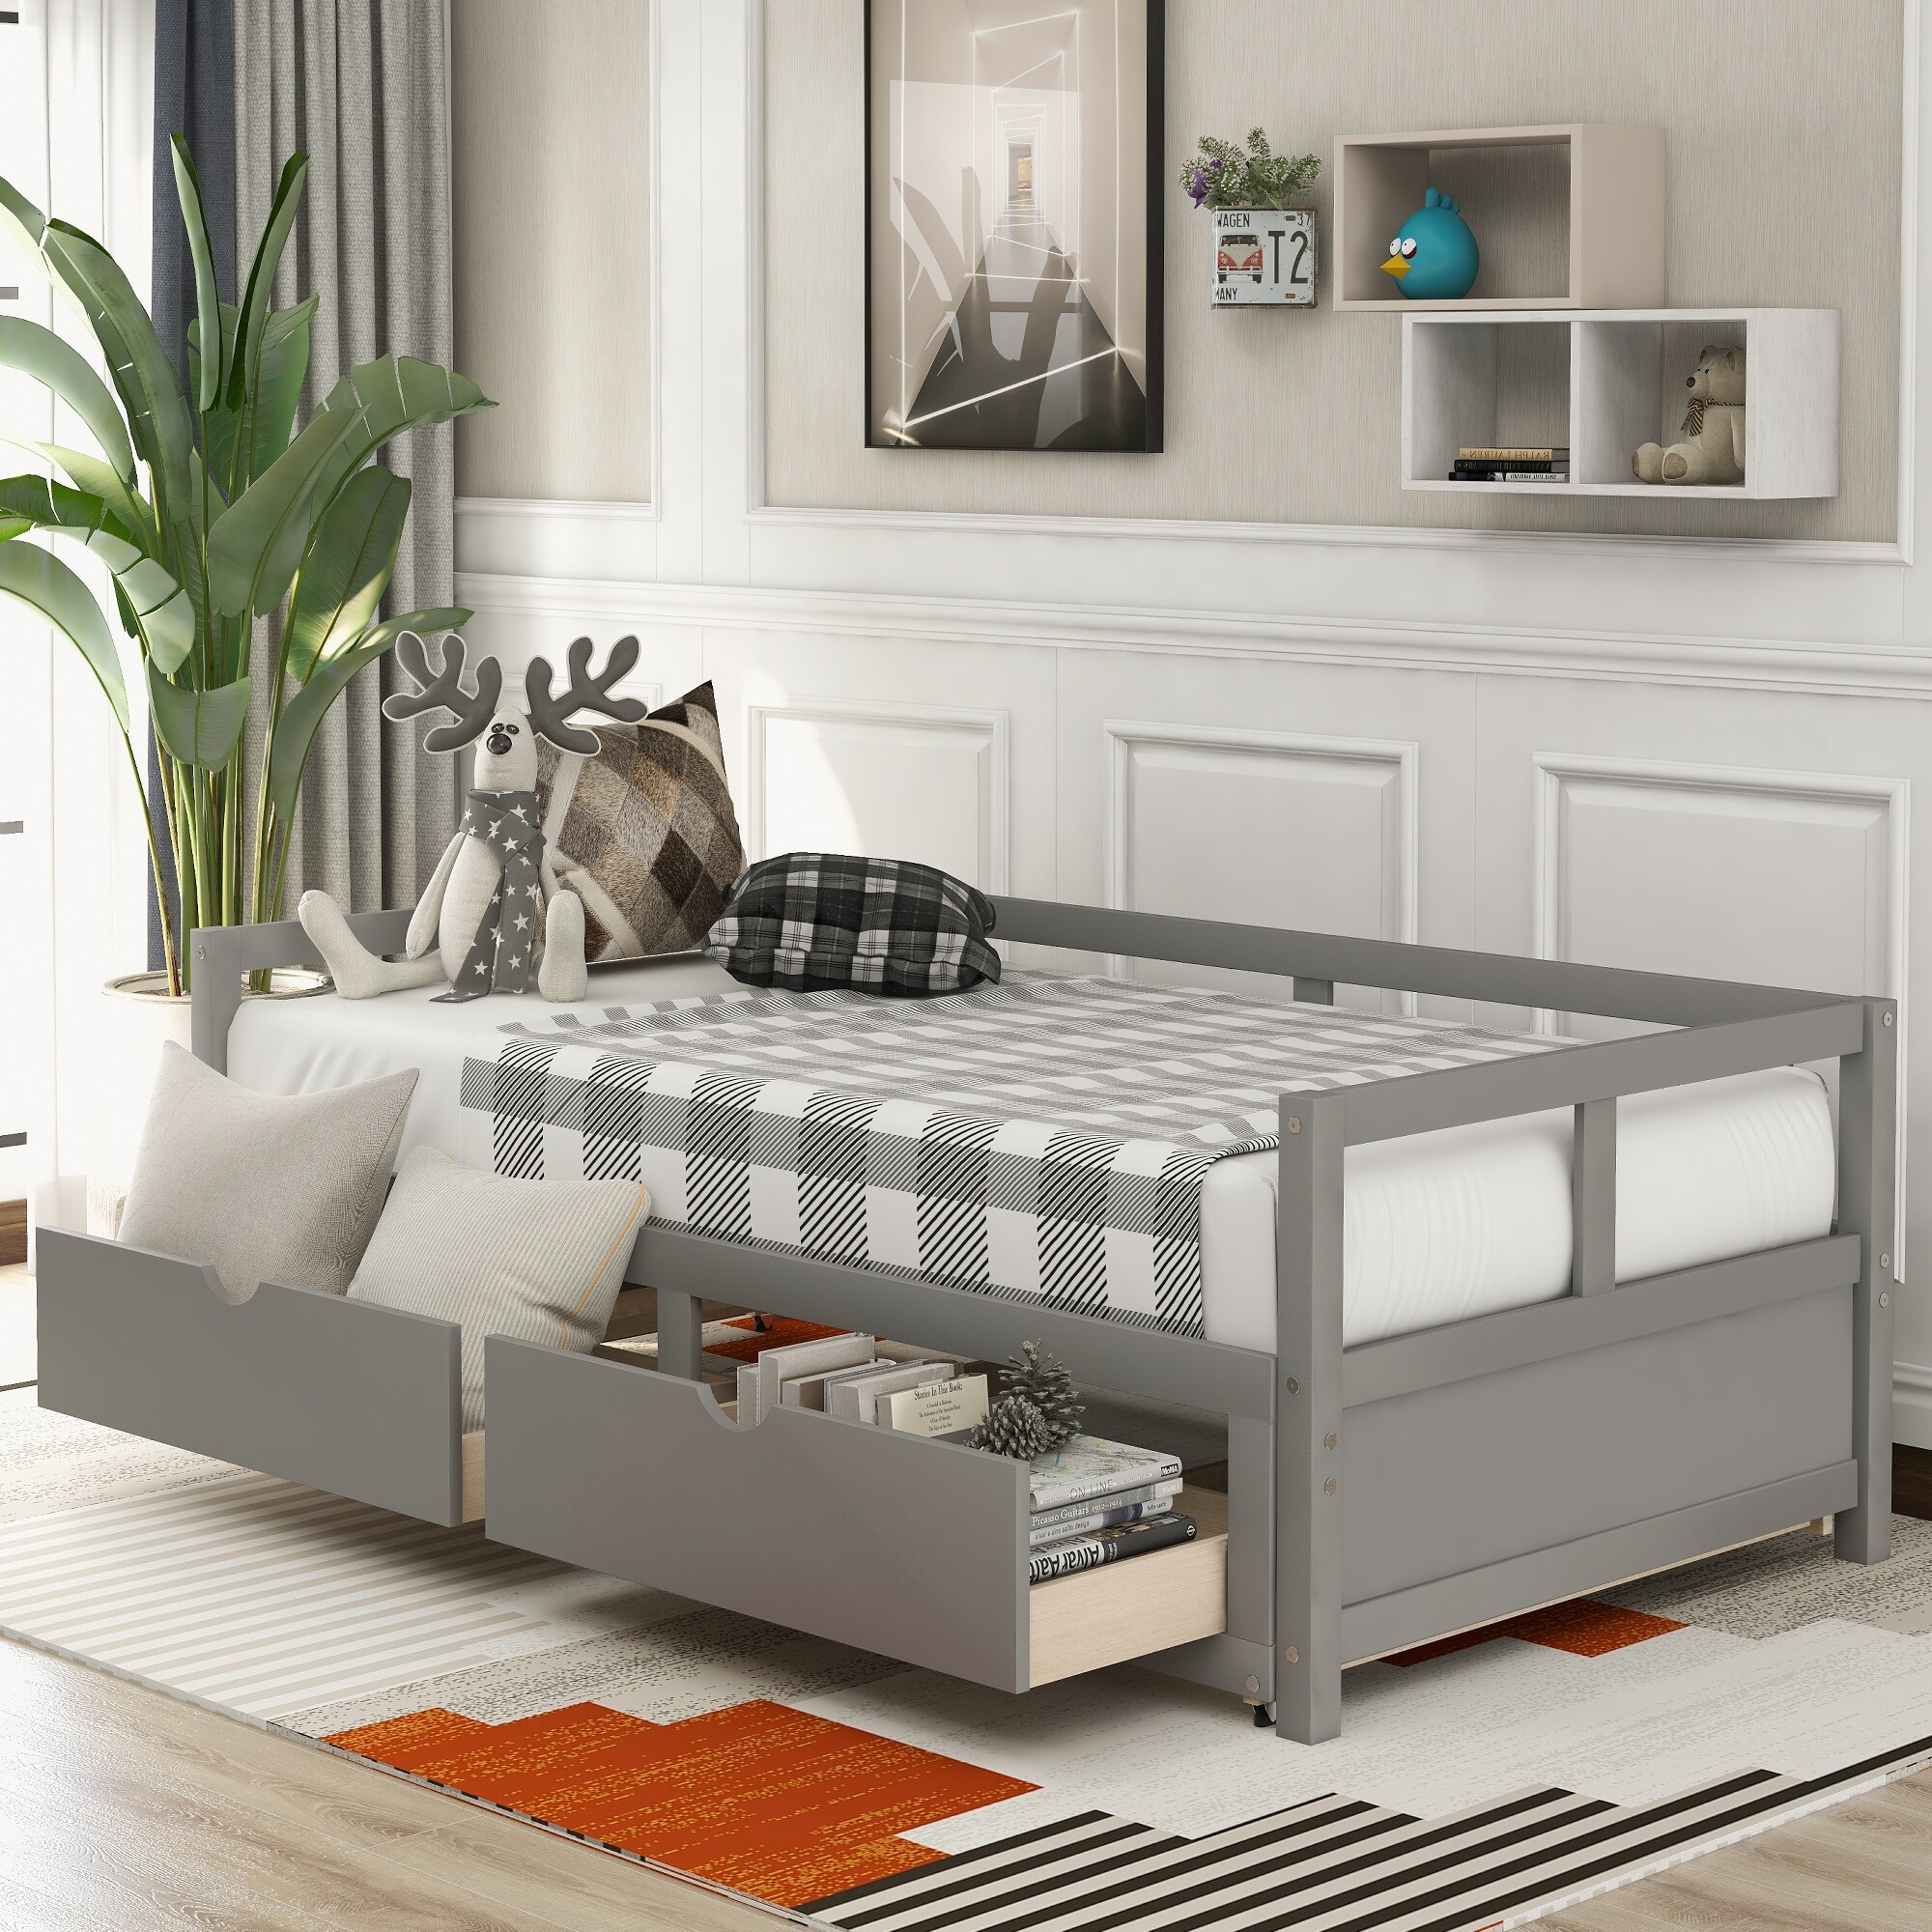 Rakisha Wooden Daybed With Trundle And Drawers